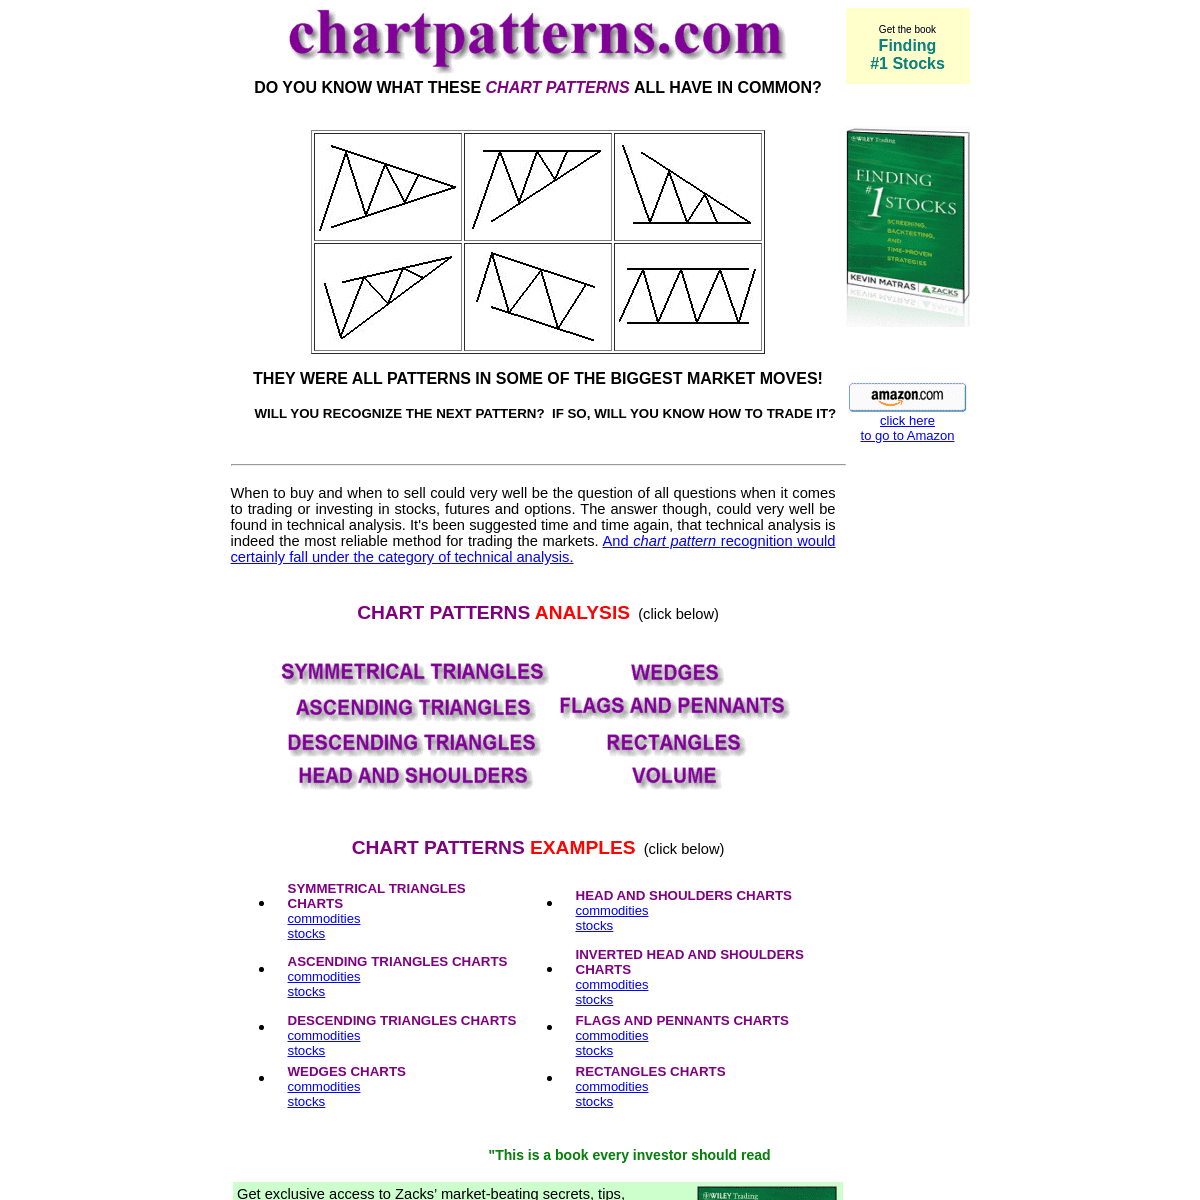 A complete backup of chartpatterns.com